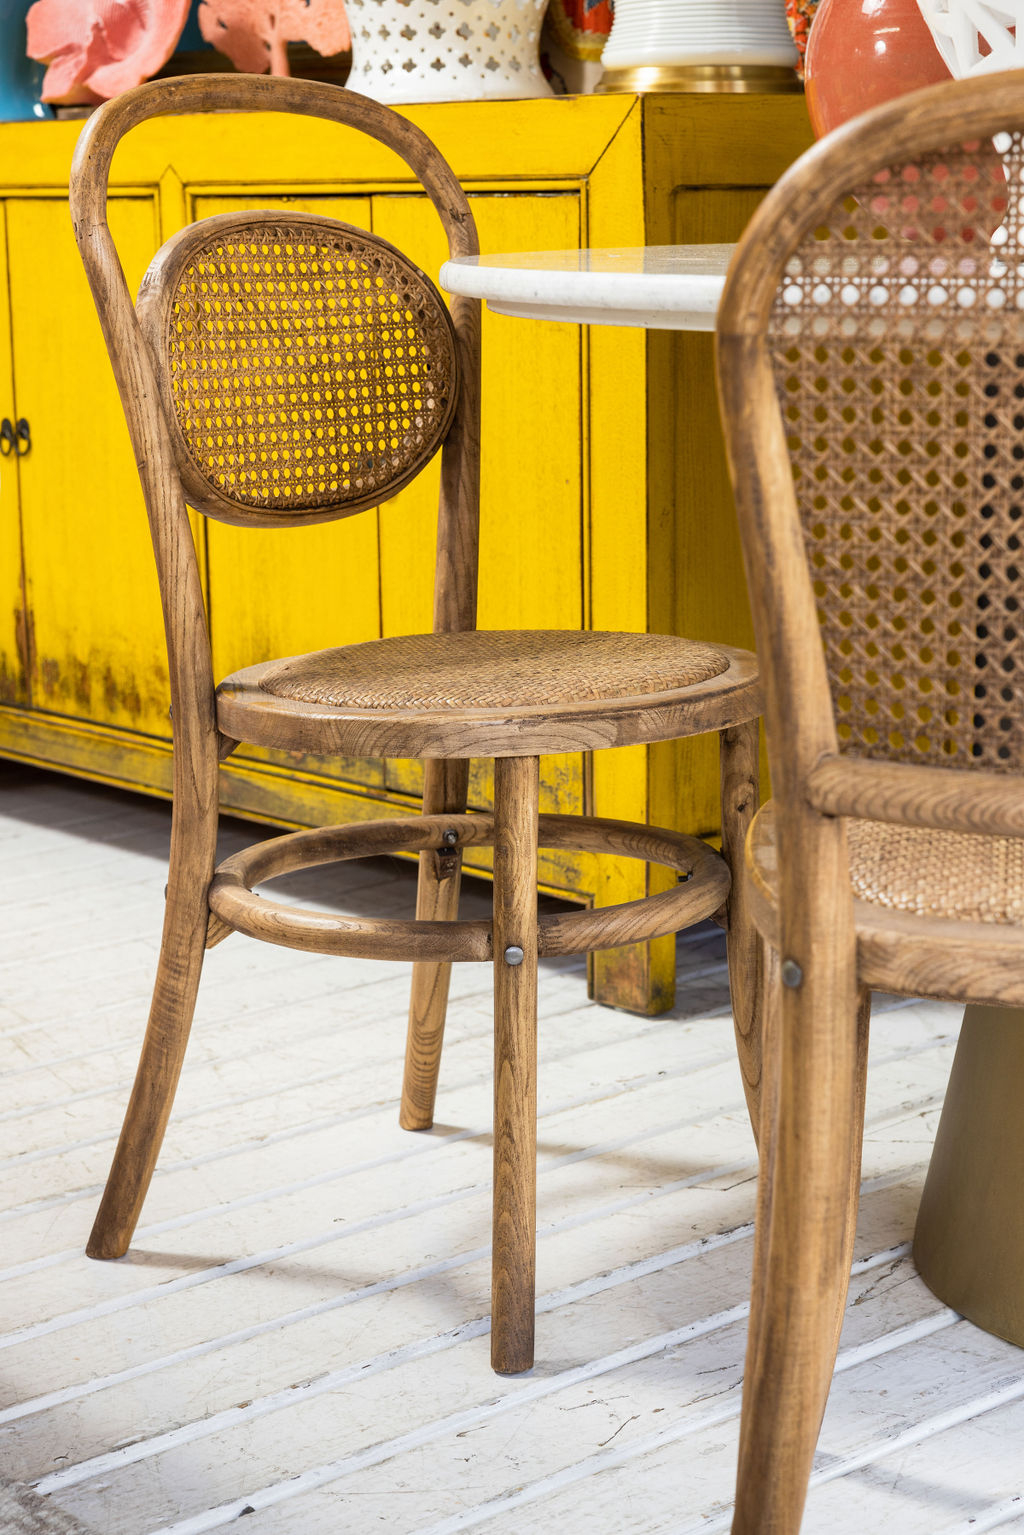 Oak dining chair with rattan back